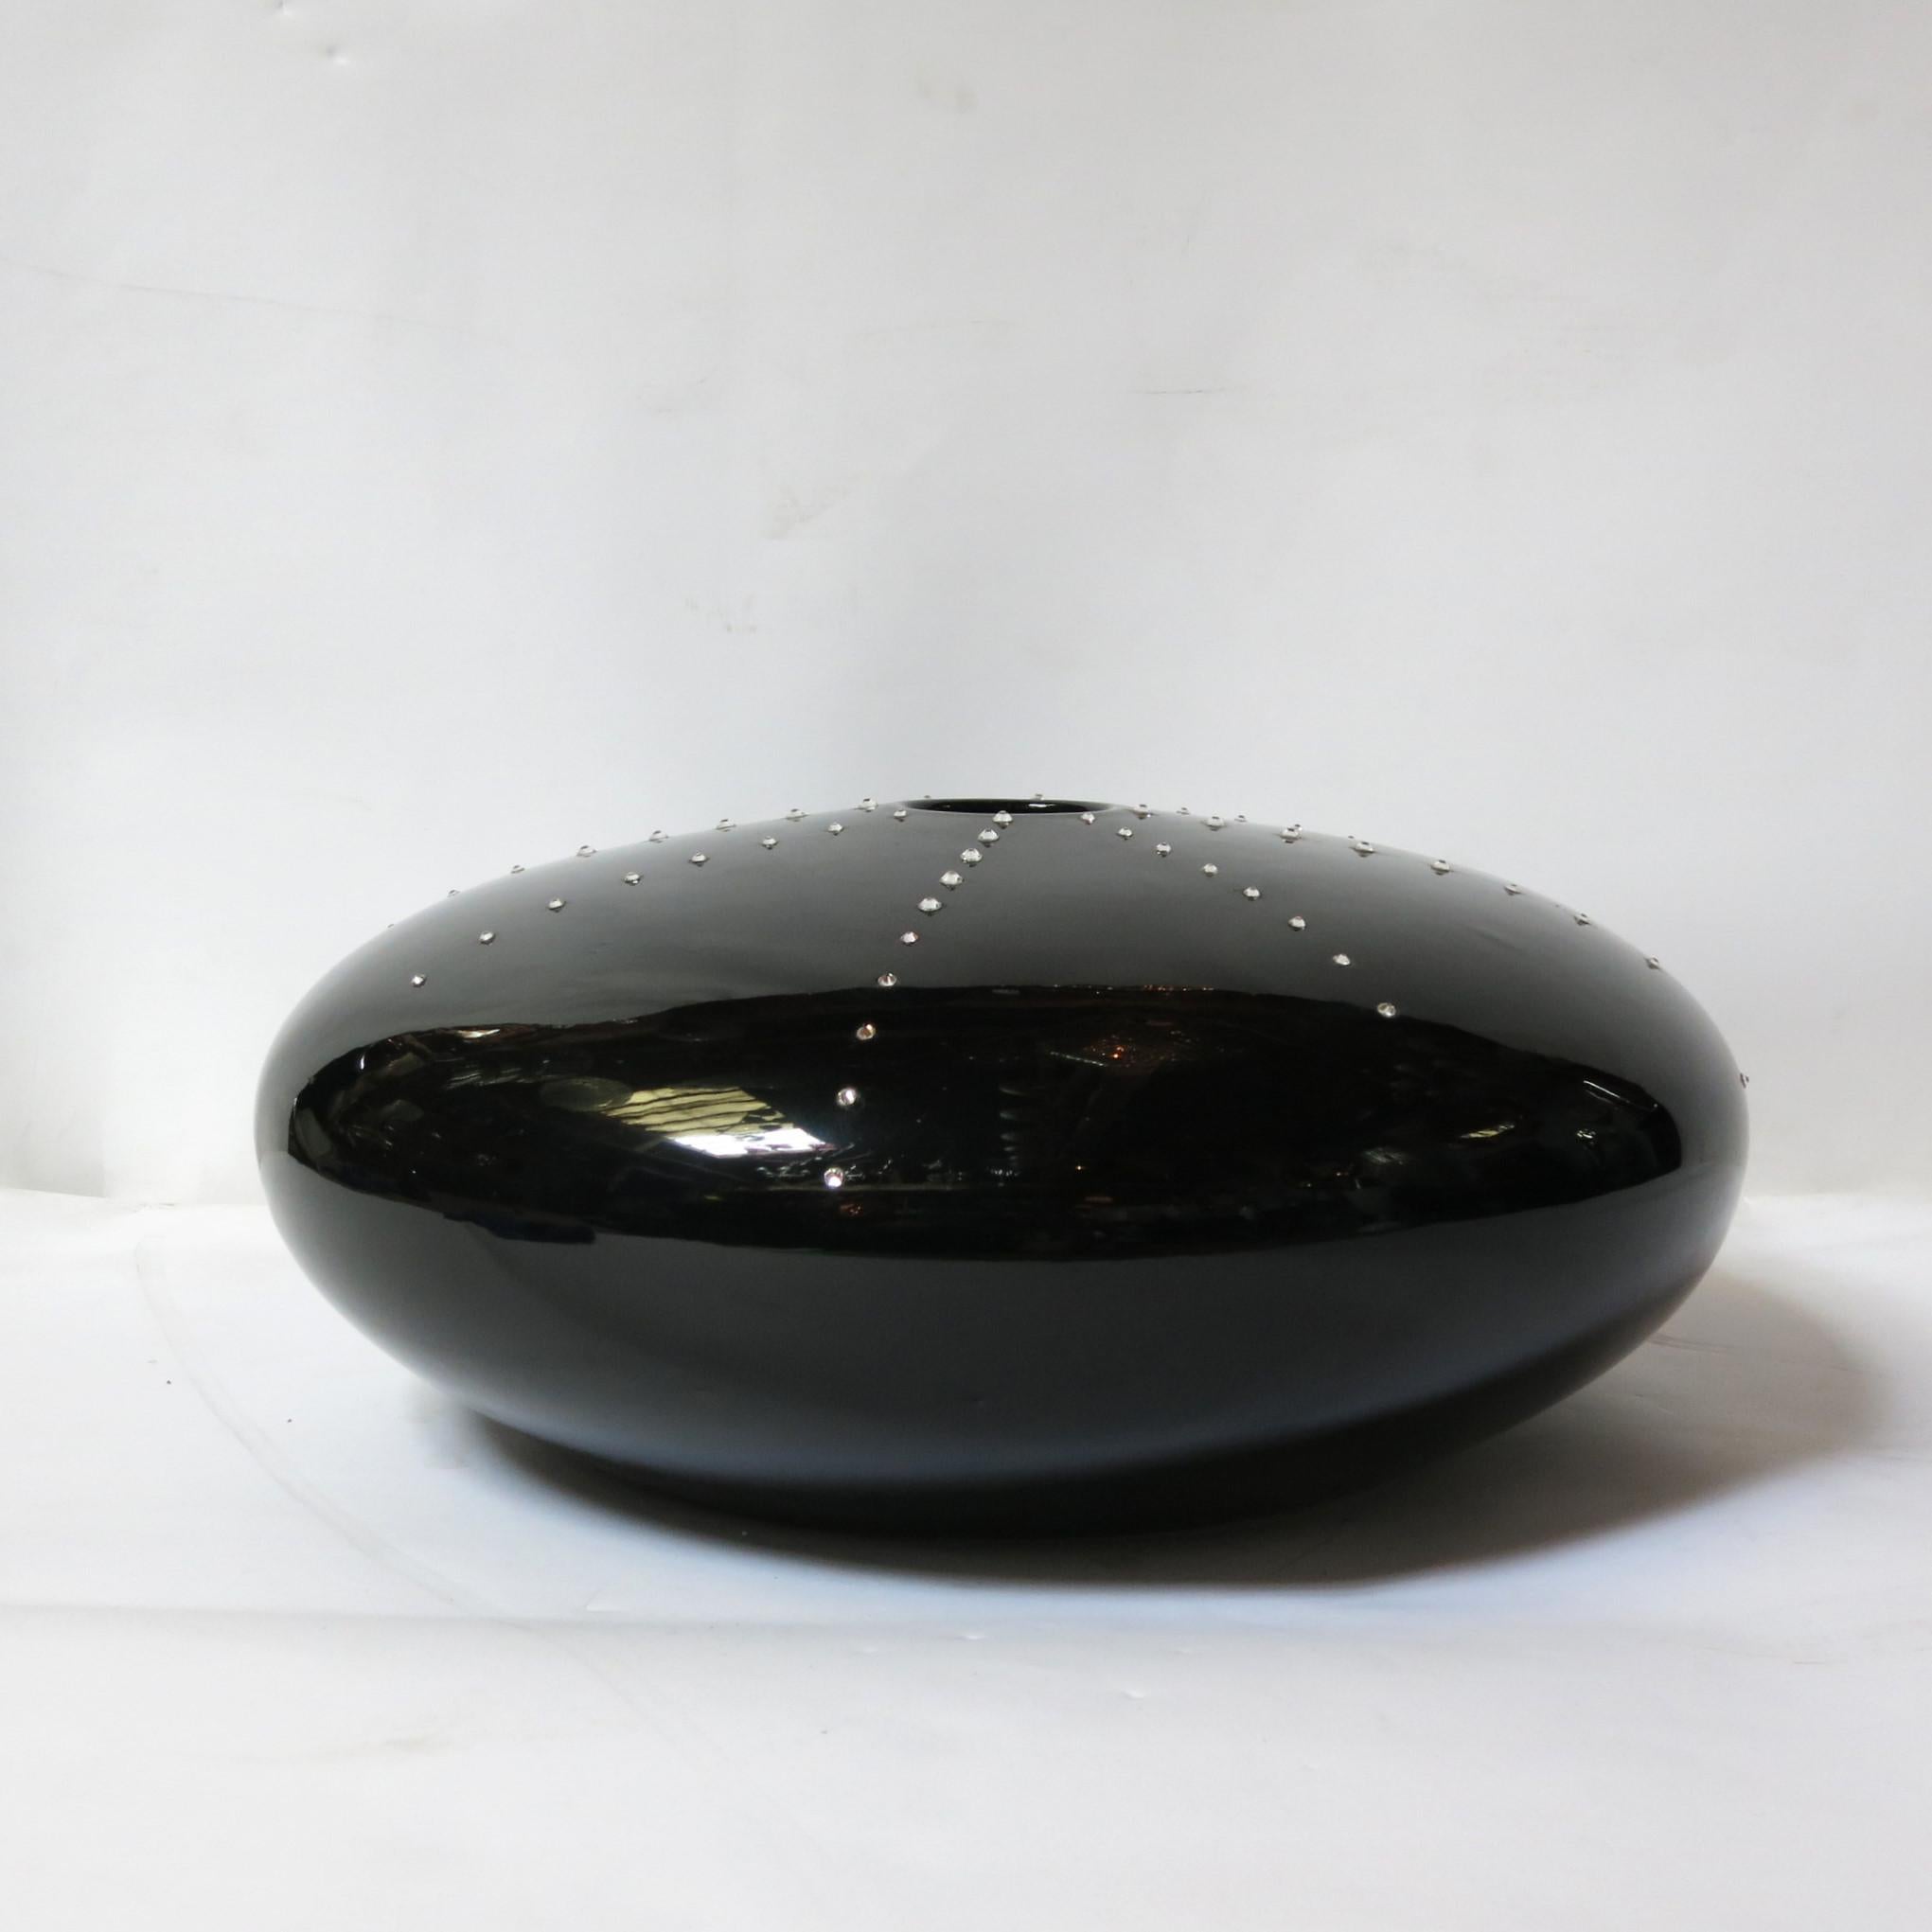 One of a kind pebble shaped black ceramic vase with Swarovski crystals / Designed by Fabio Bergomi / Made in Italy
Diameter: 19 inches / Height: 7 inches
1 in stock in Palm Springs currently ON FINAL CLEARANCE SALE for $799!!!
This piece makes for a